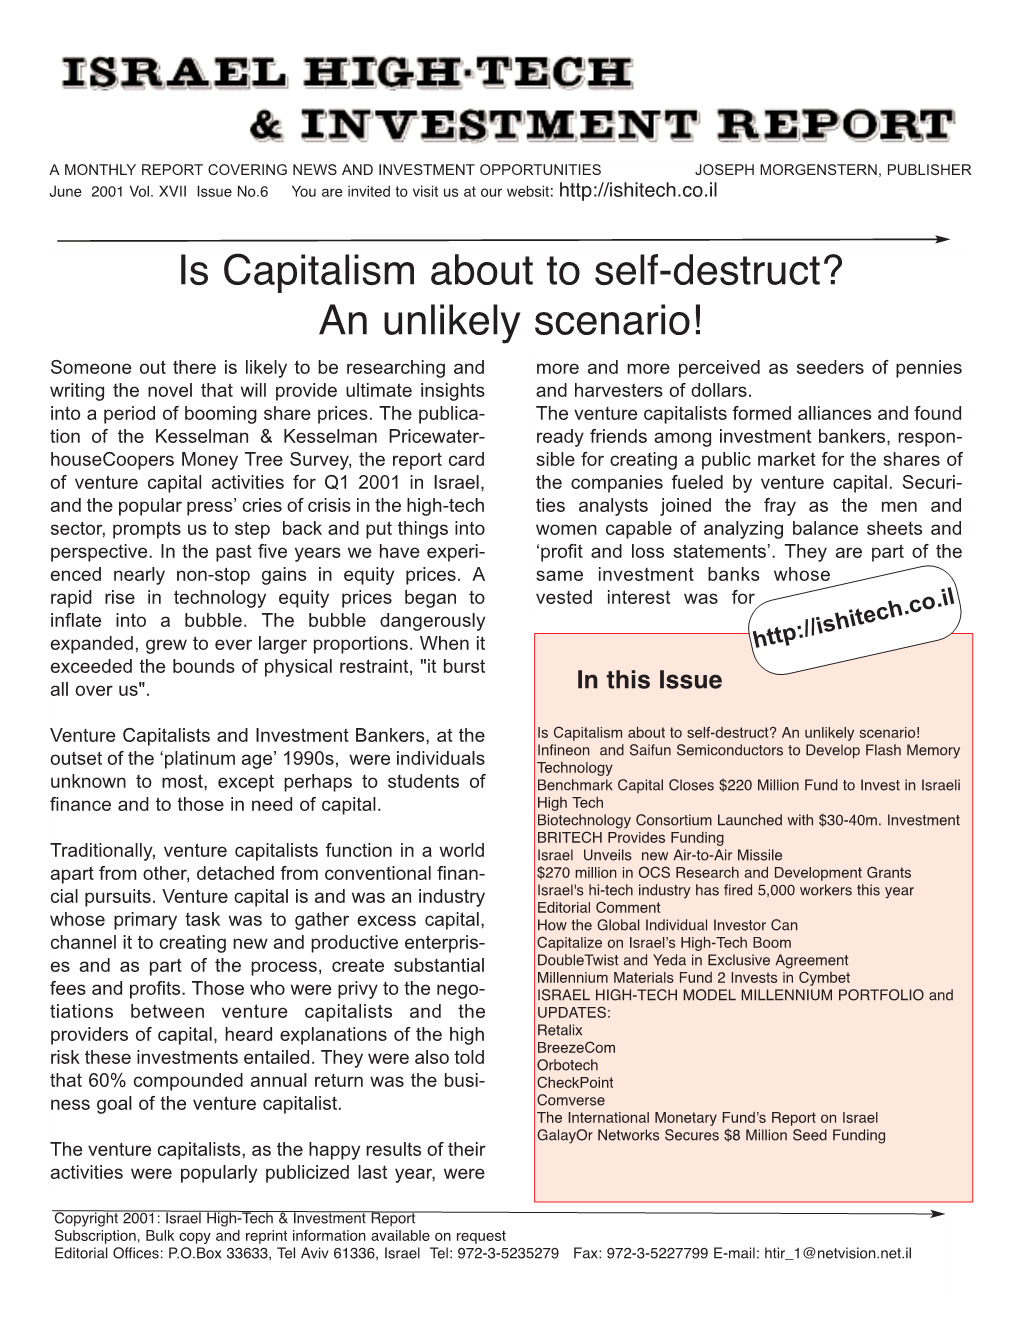 Is Capitalism About to Self-Destruct?